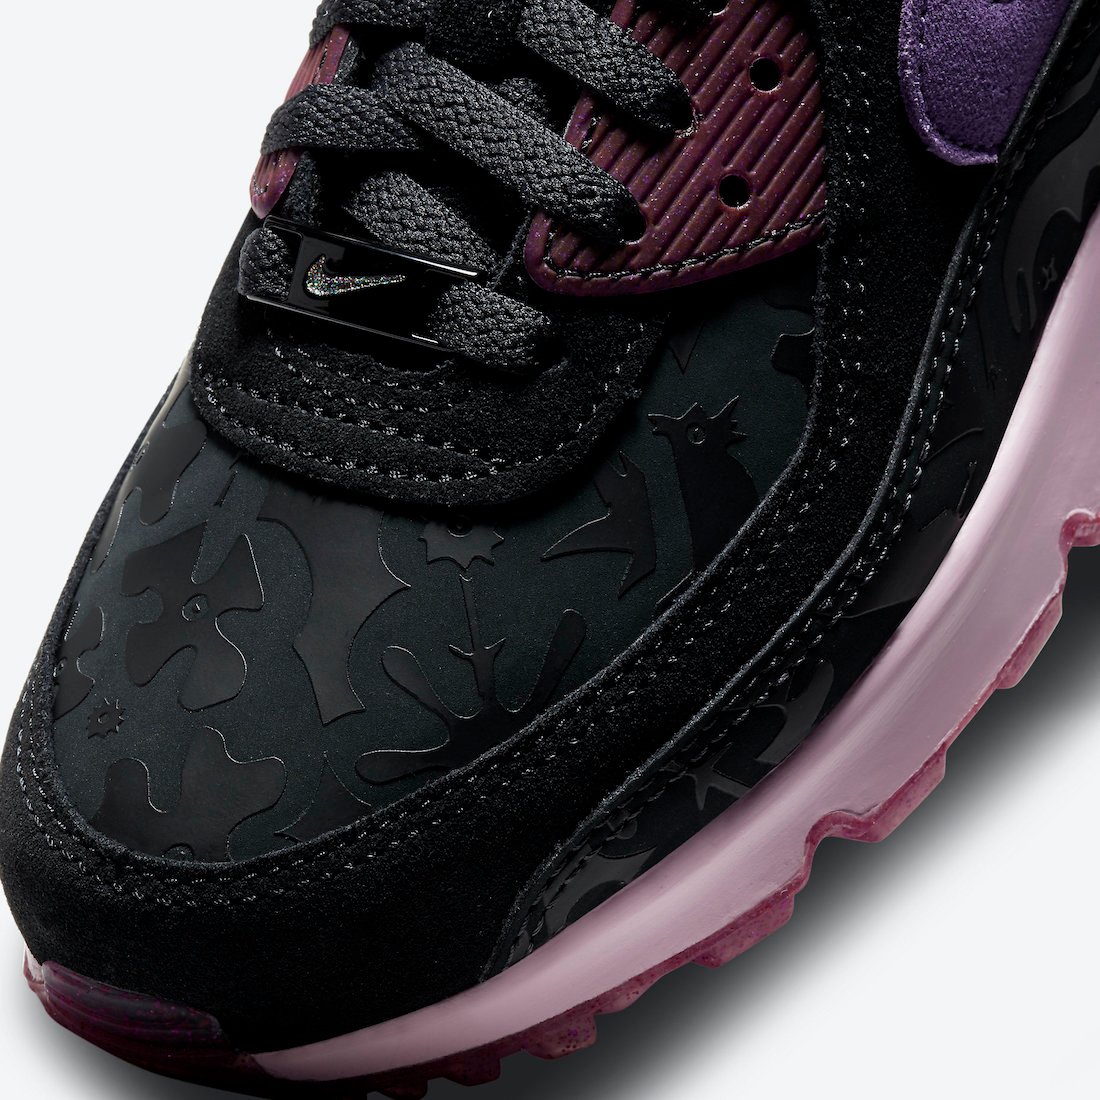 Nike Air Max 90 SE Black Arctic Pink DD5517-010 Release Date Info